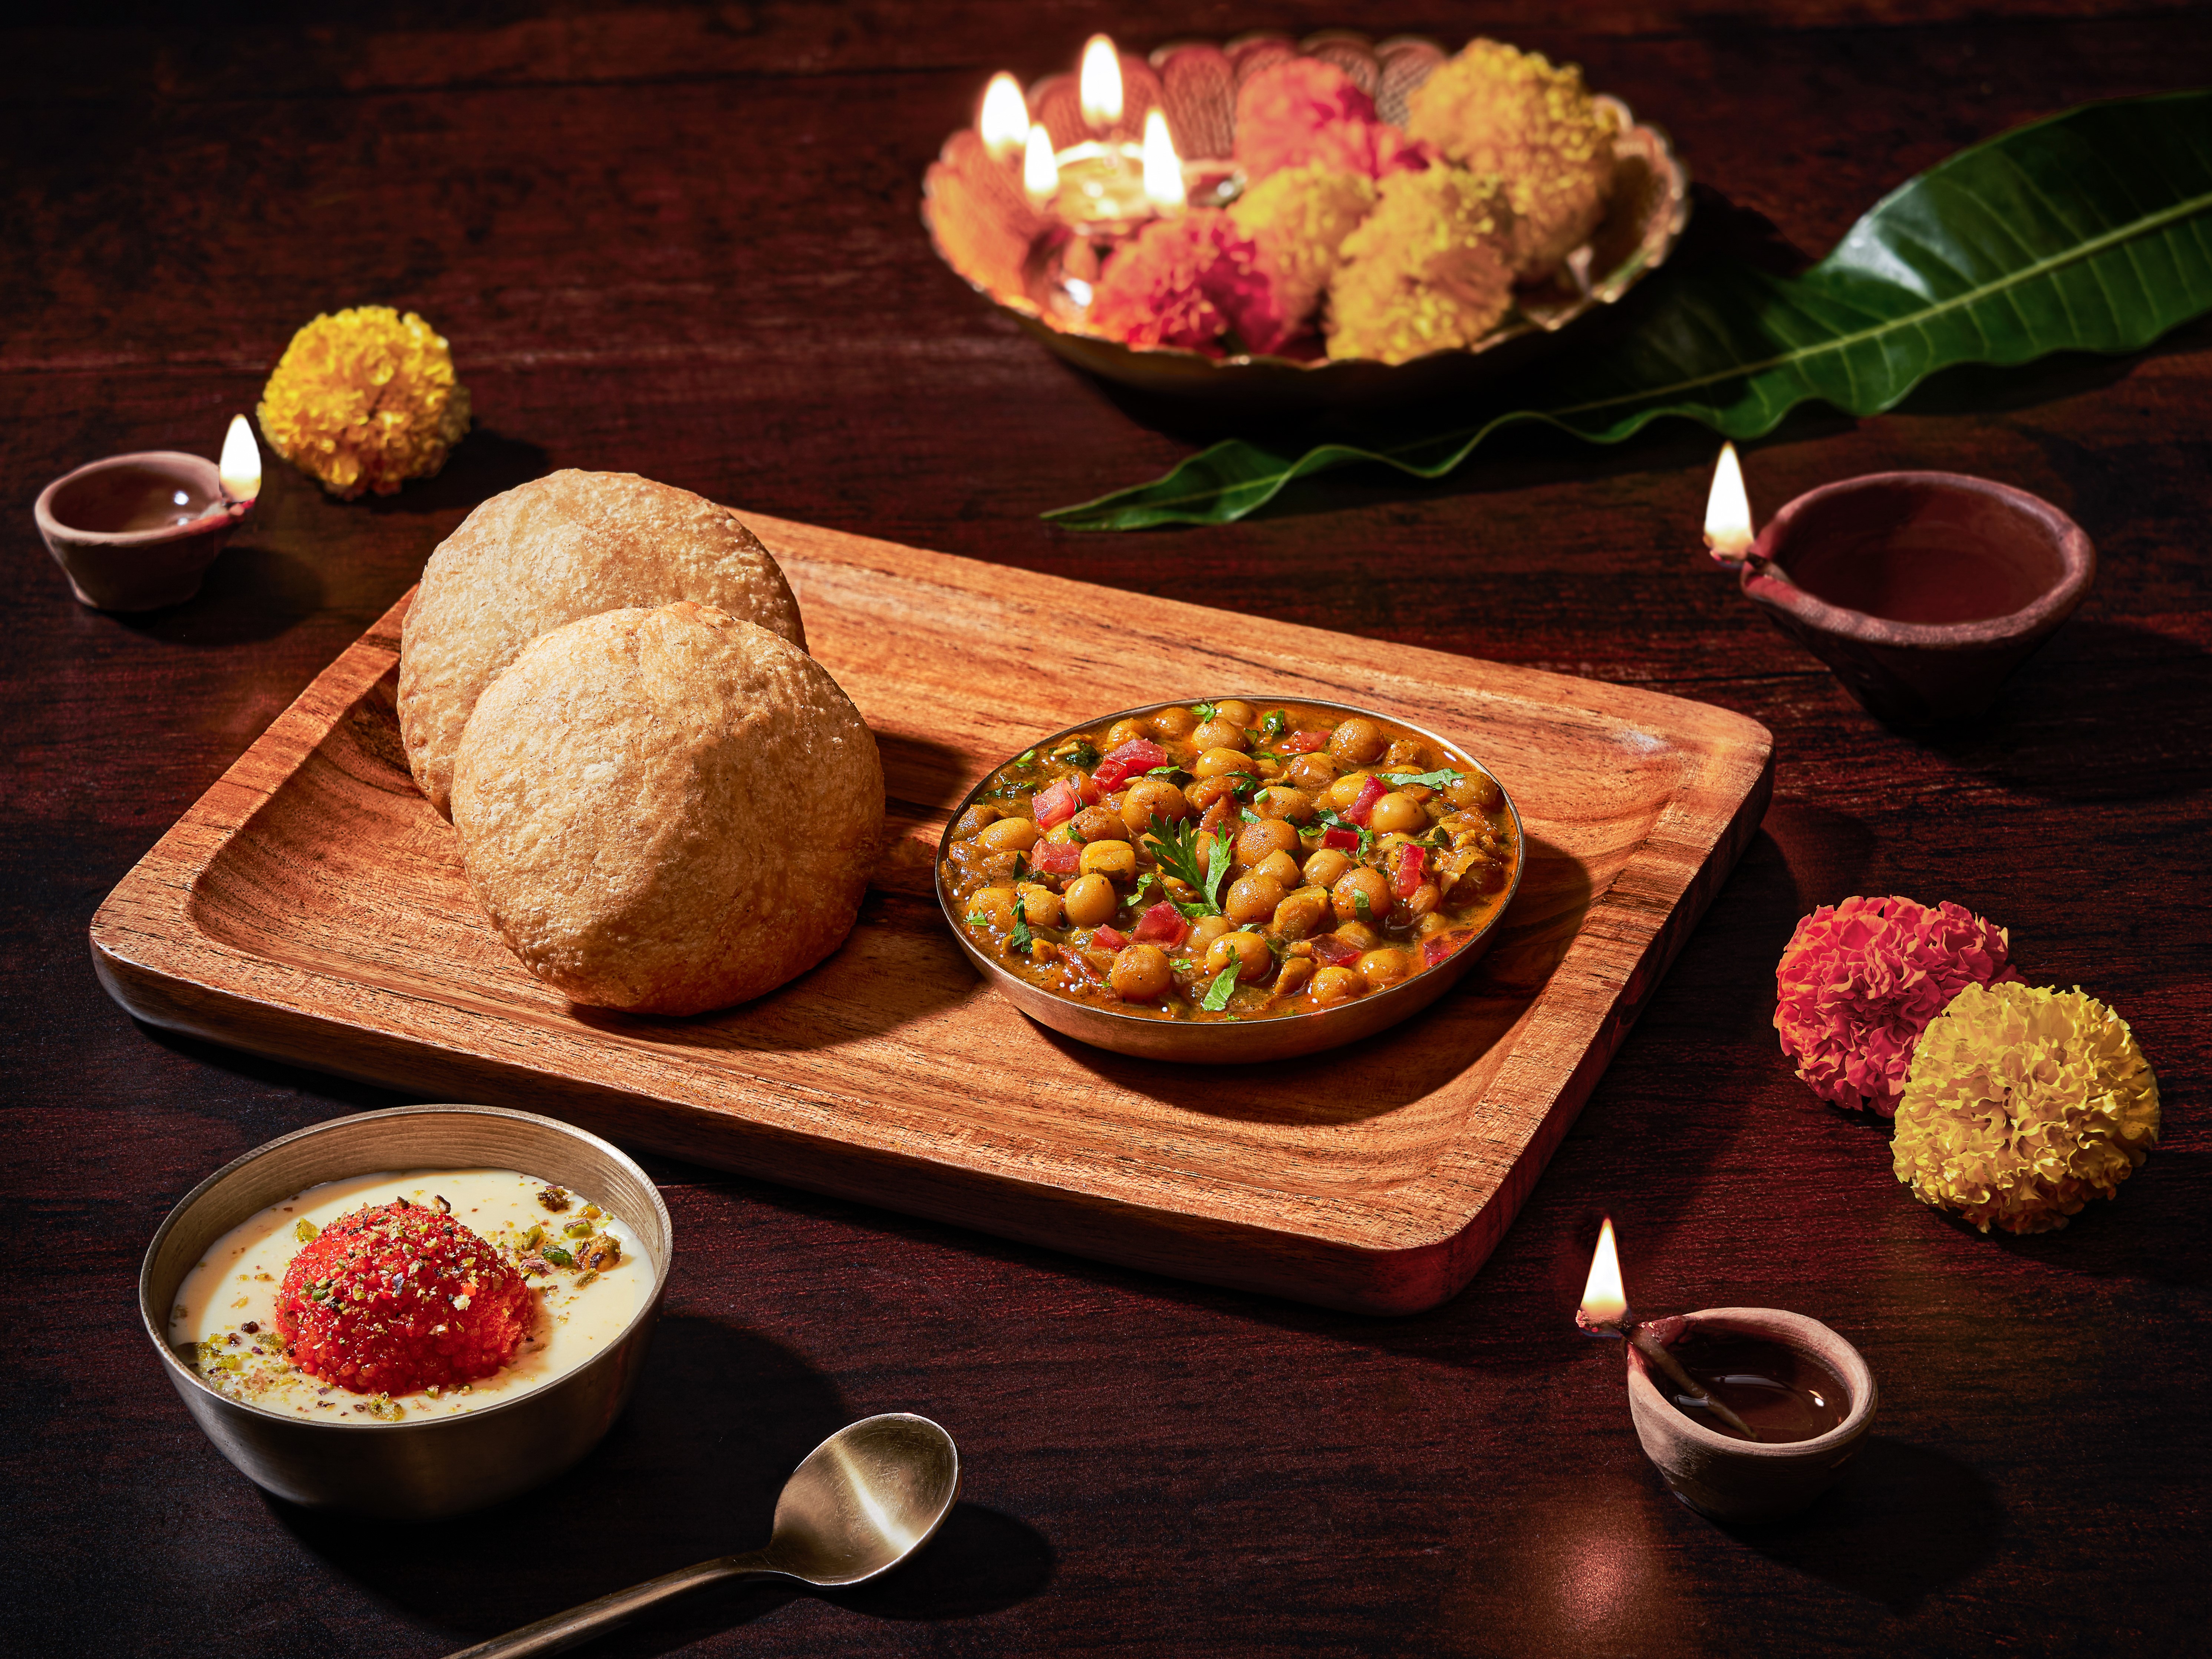  Celebrate the festival of lights in the skies with Café Akasa's Diwali Special Meal